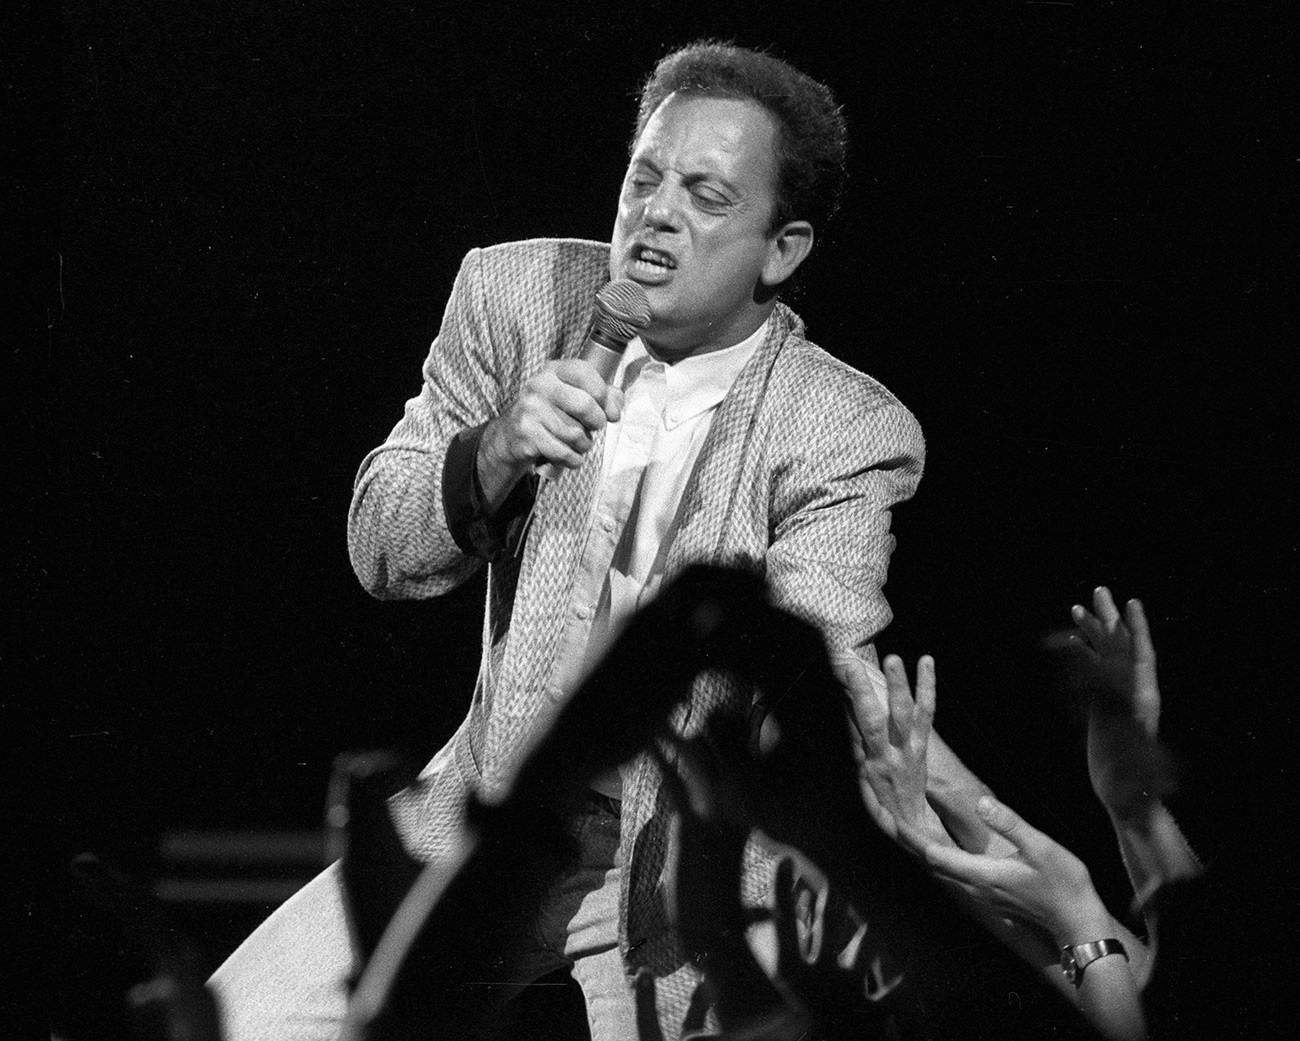 Billy Joel sings at the Olympiisky sport complex, Moscow